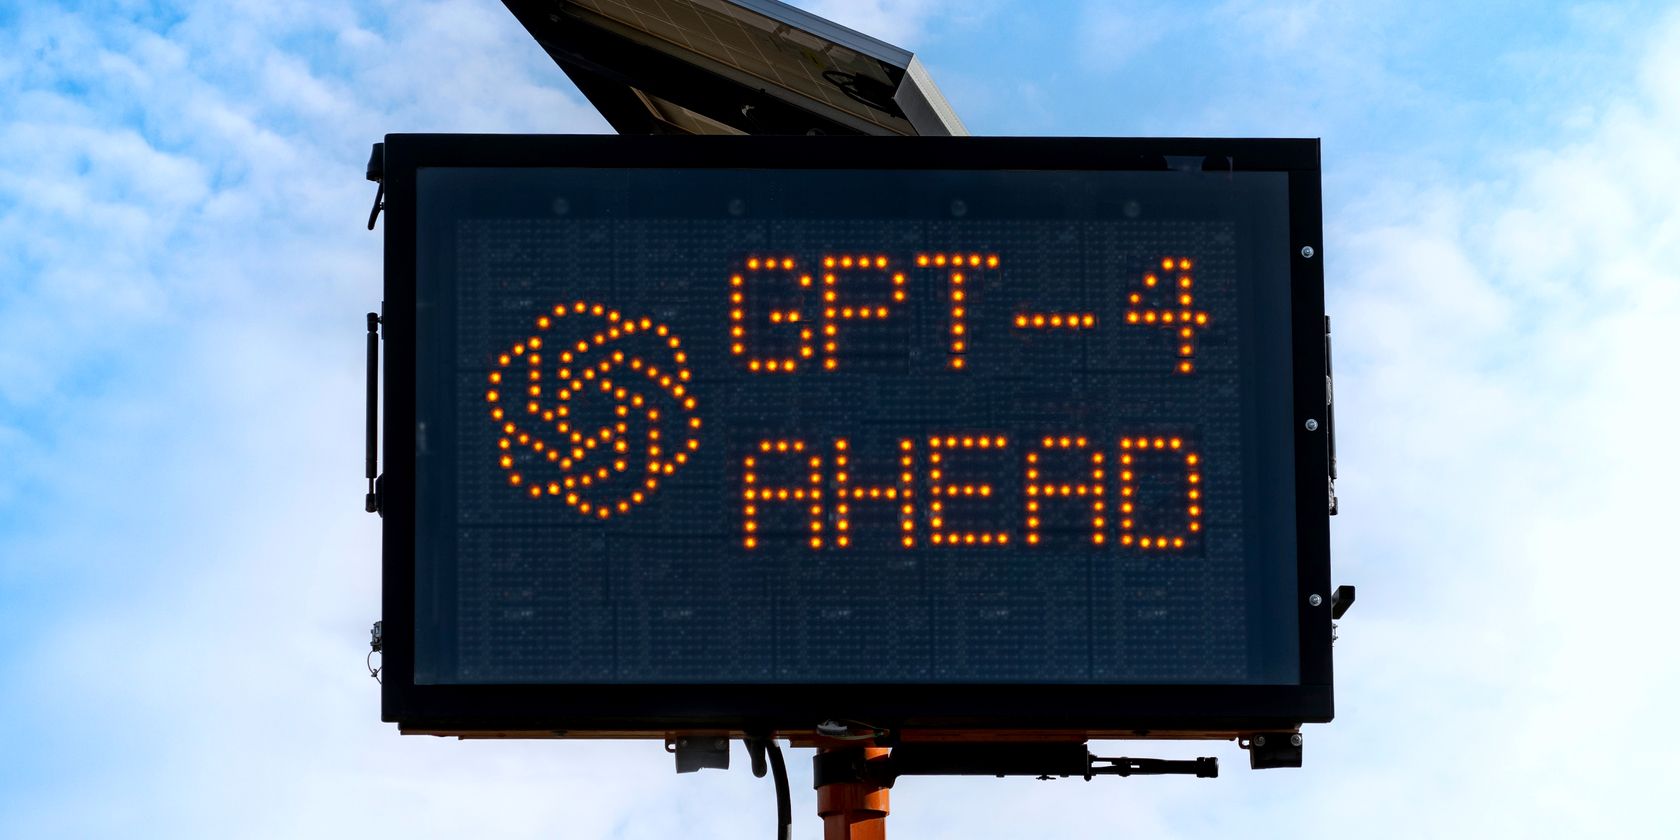 gpt-4 ahead sign on dot matrix display feature